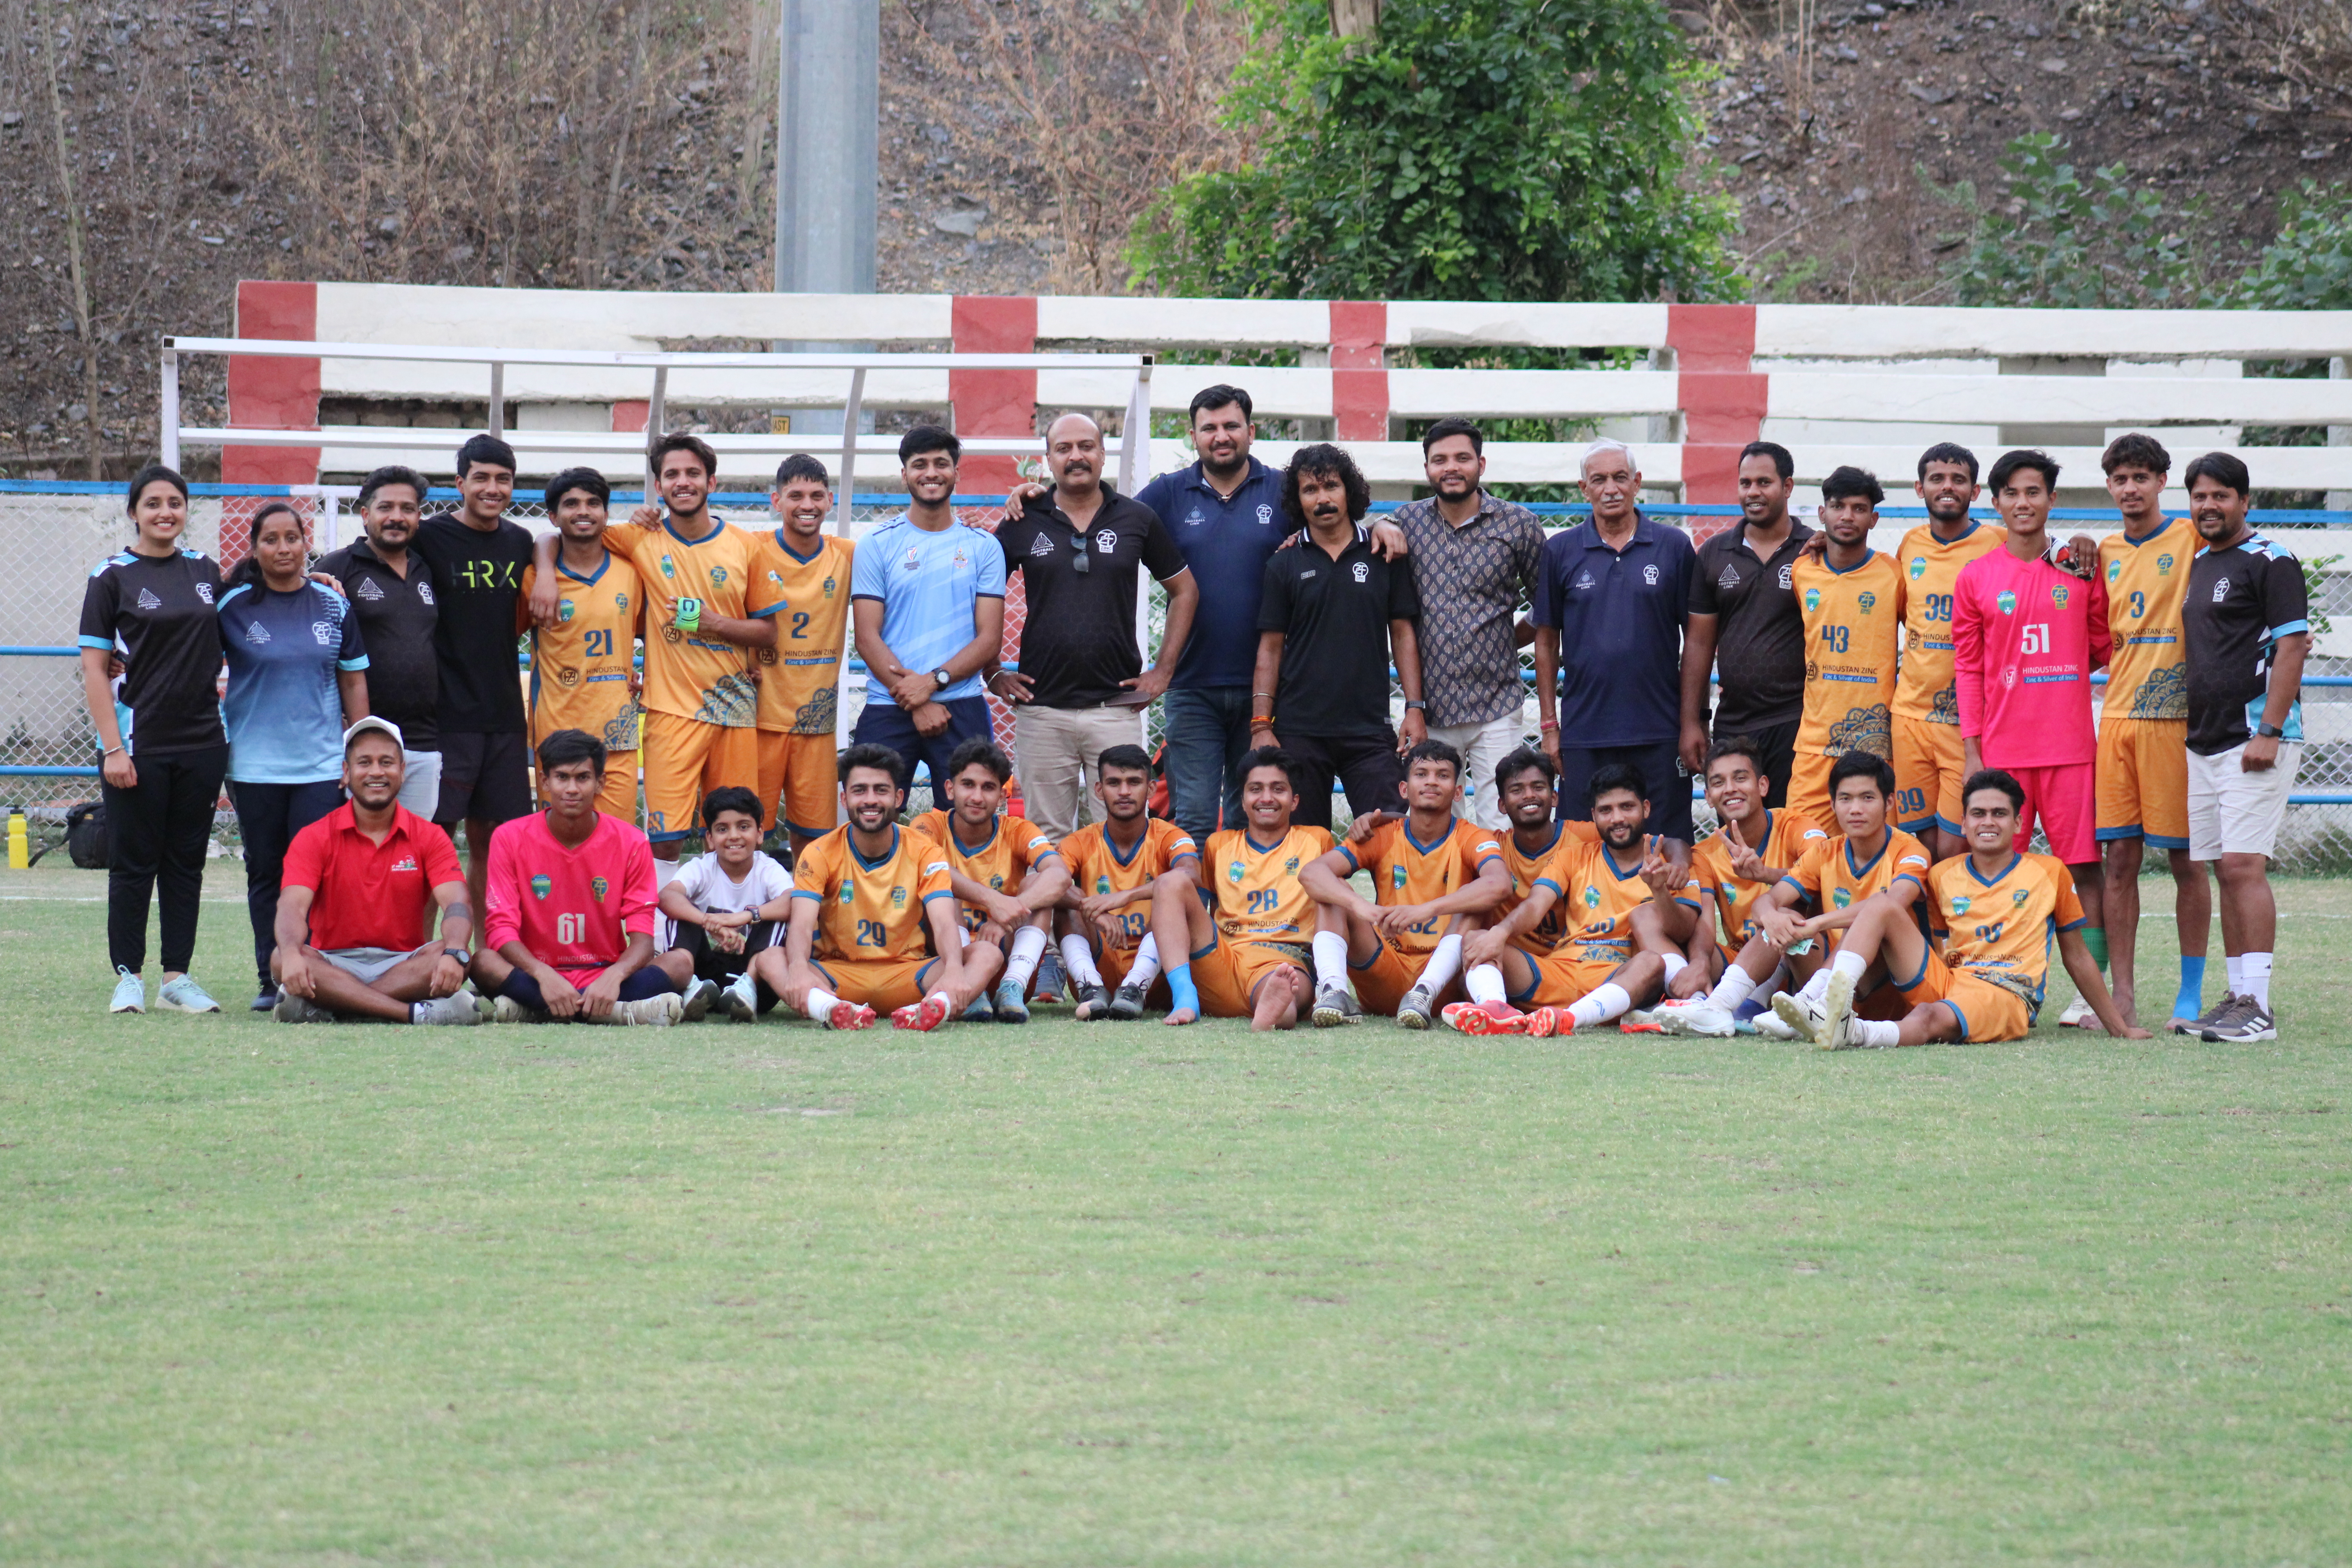 ZINC FOOTBALL ACADEMY FINISH THIRD IN RAJASTHAN MEN’S LEAGUE; STAY UNDEFEATED IN LAST 12 MATCHES